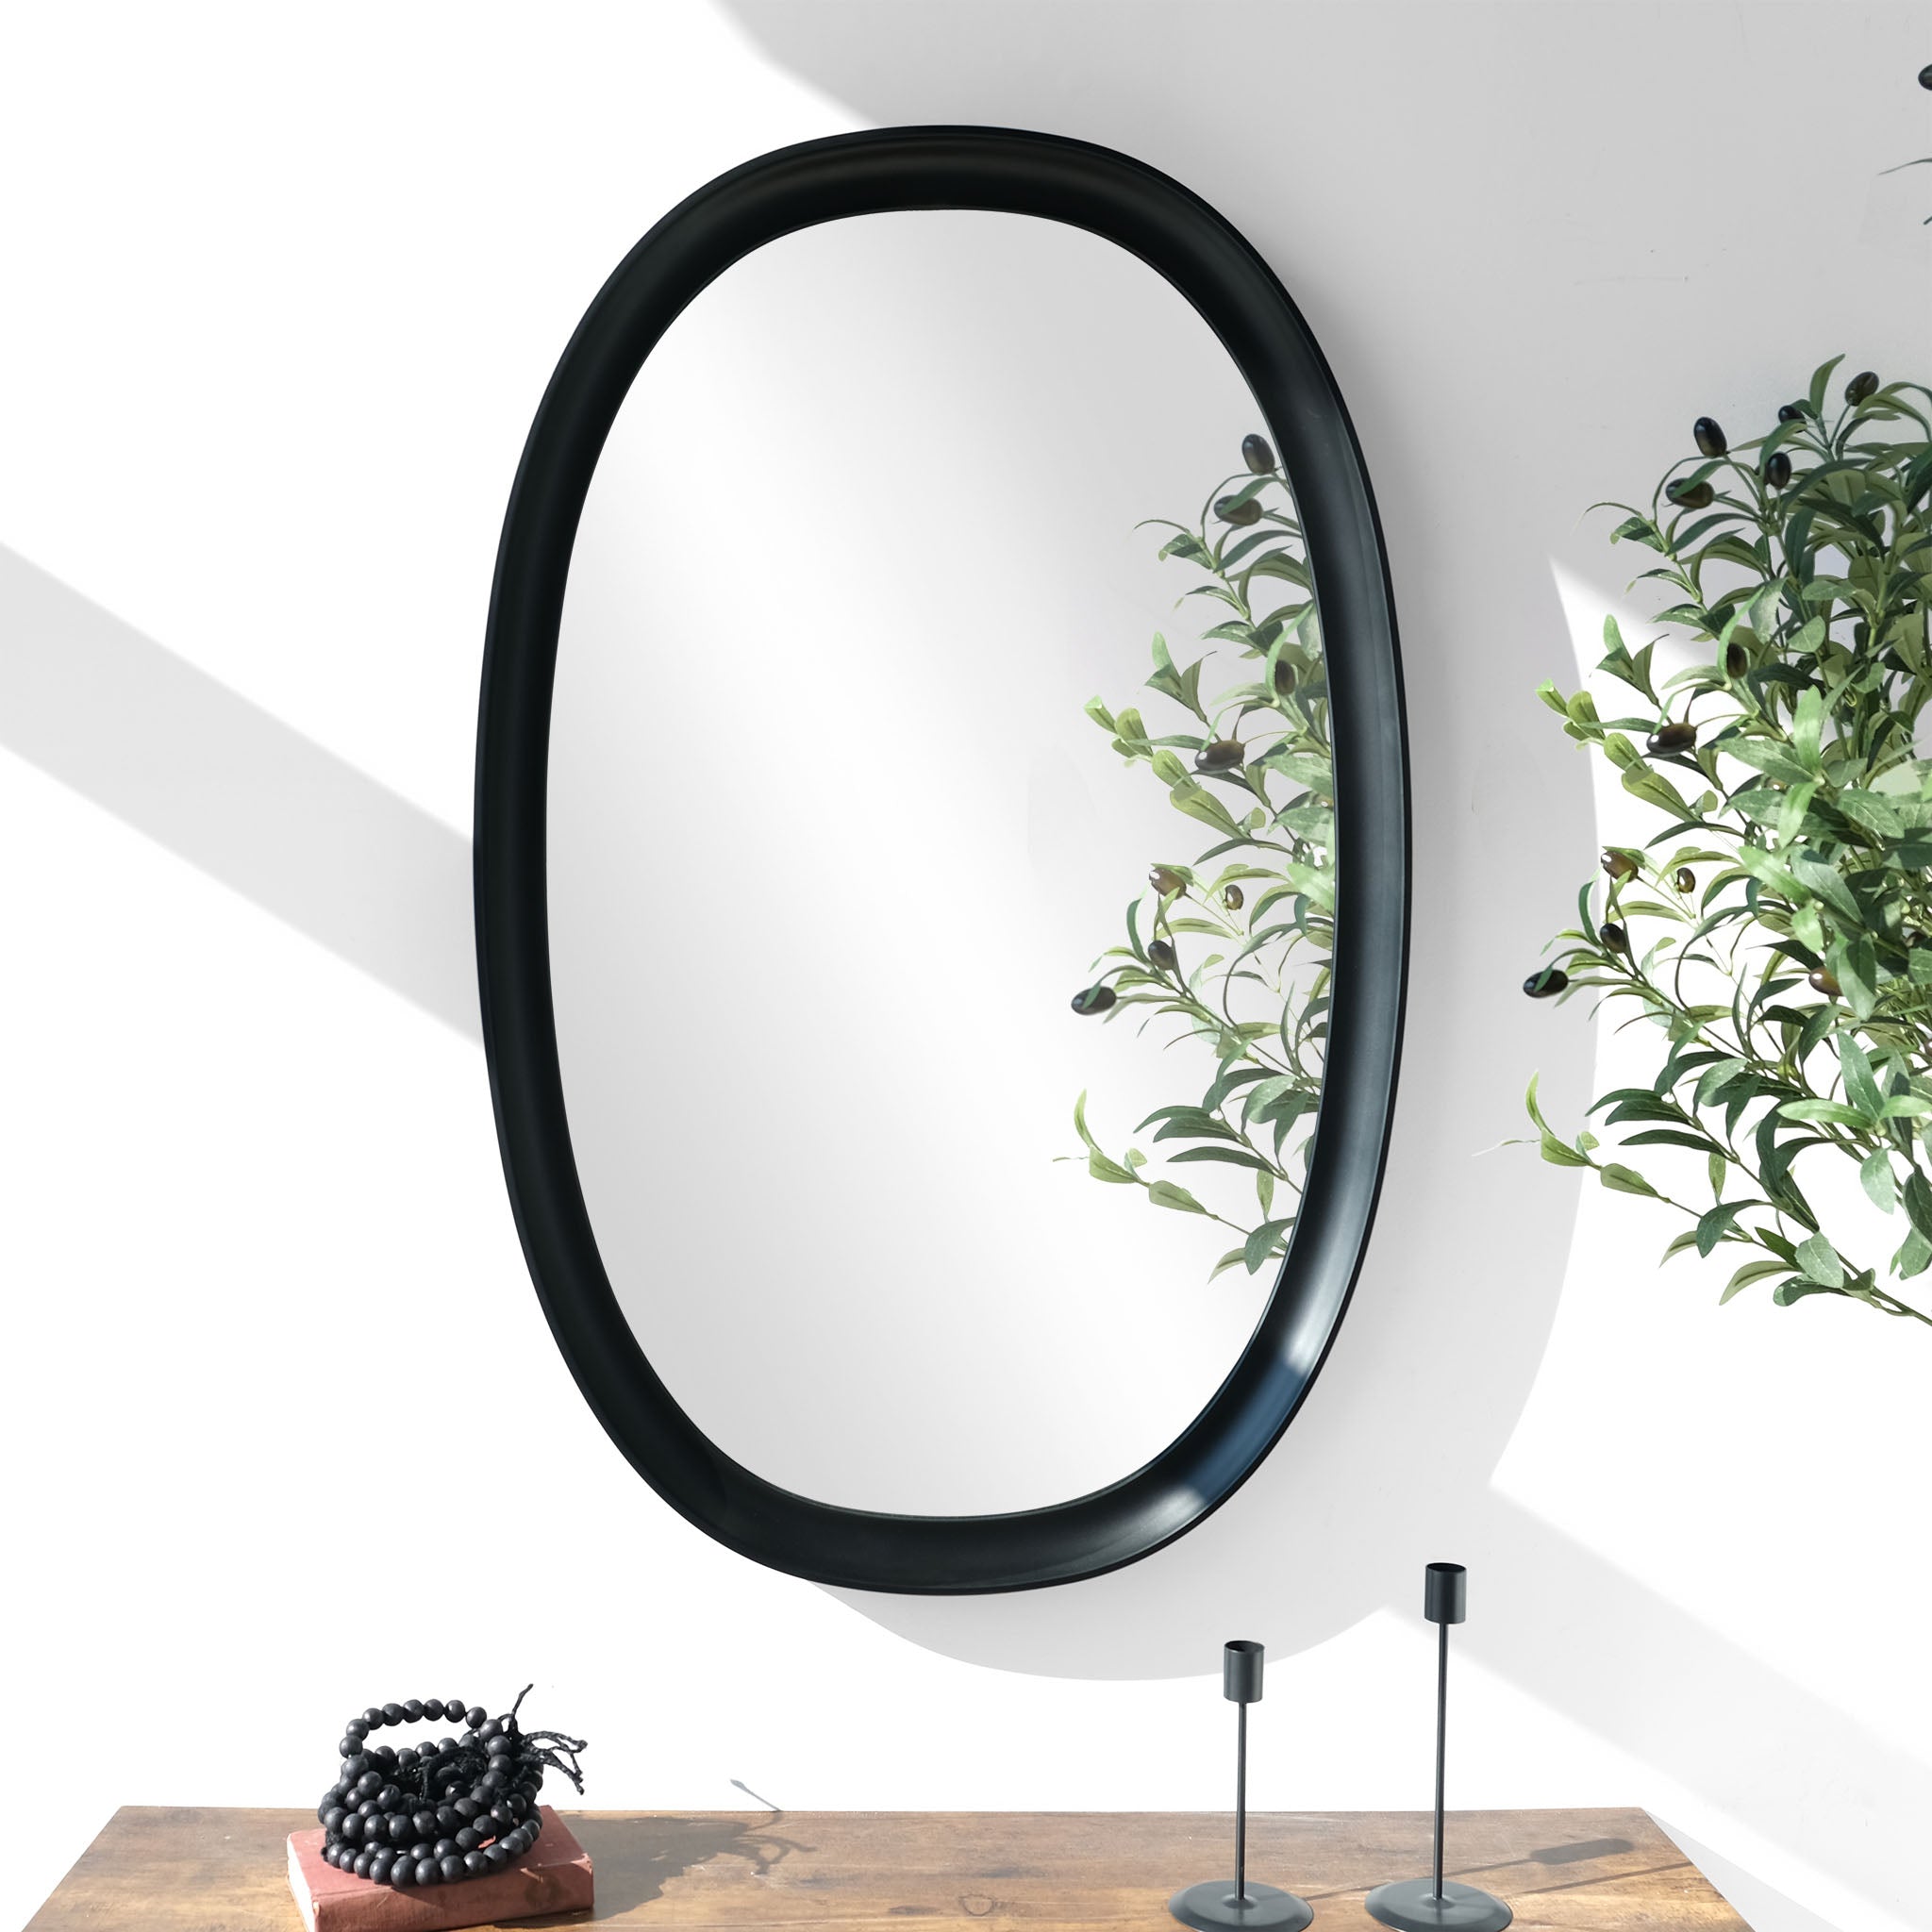 Parisienne black oval mirror over a console table